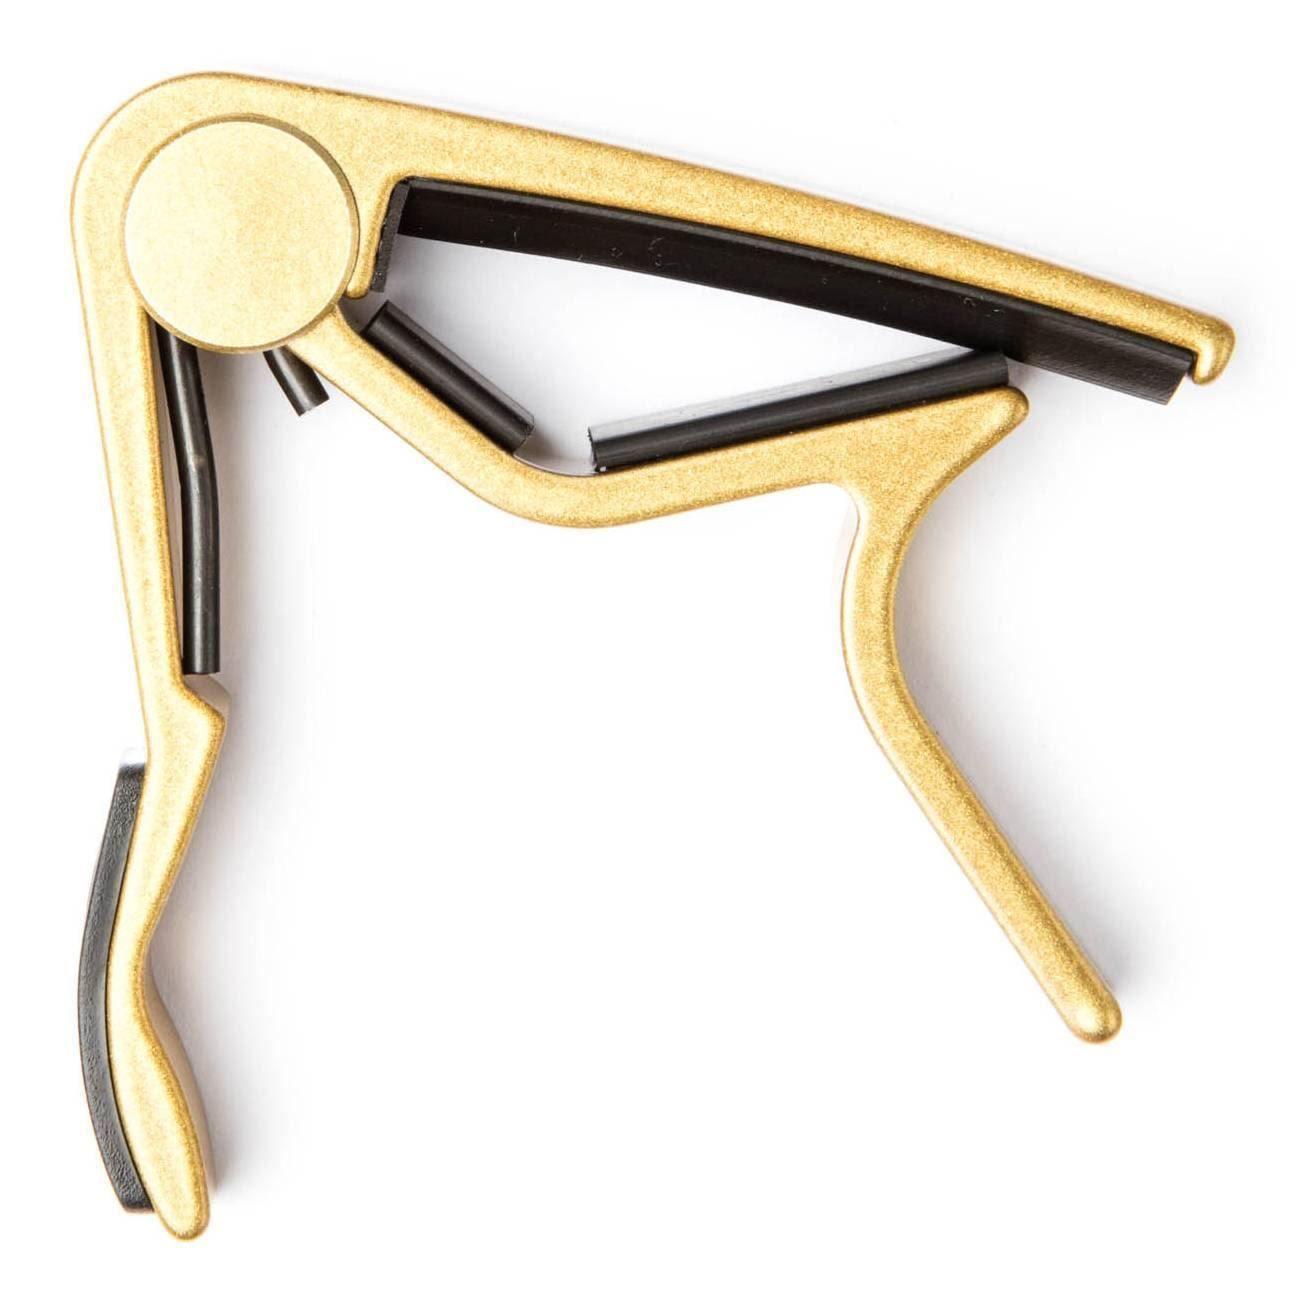 Capo Guitar Acoustic Curved Gold - Capos by Jim Dunlop at Muso's Stuff